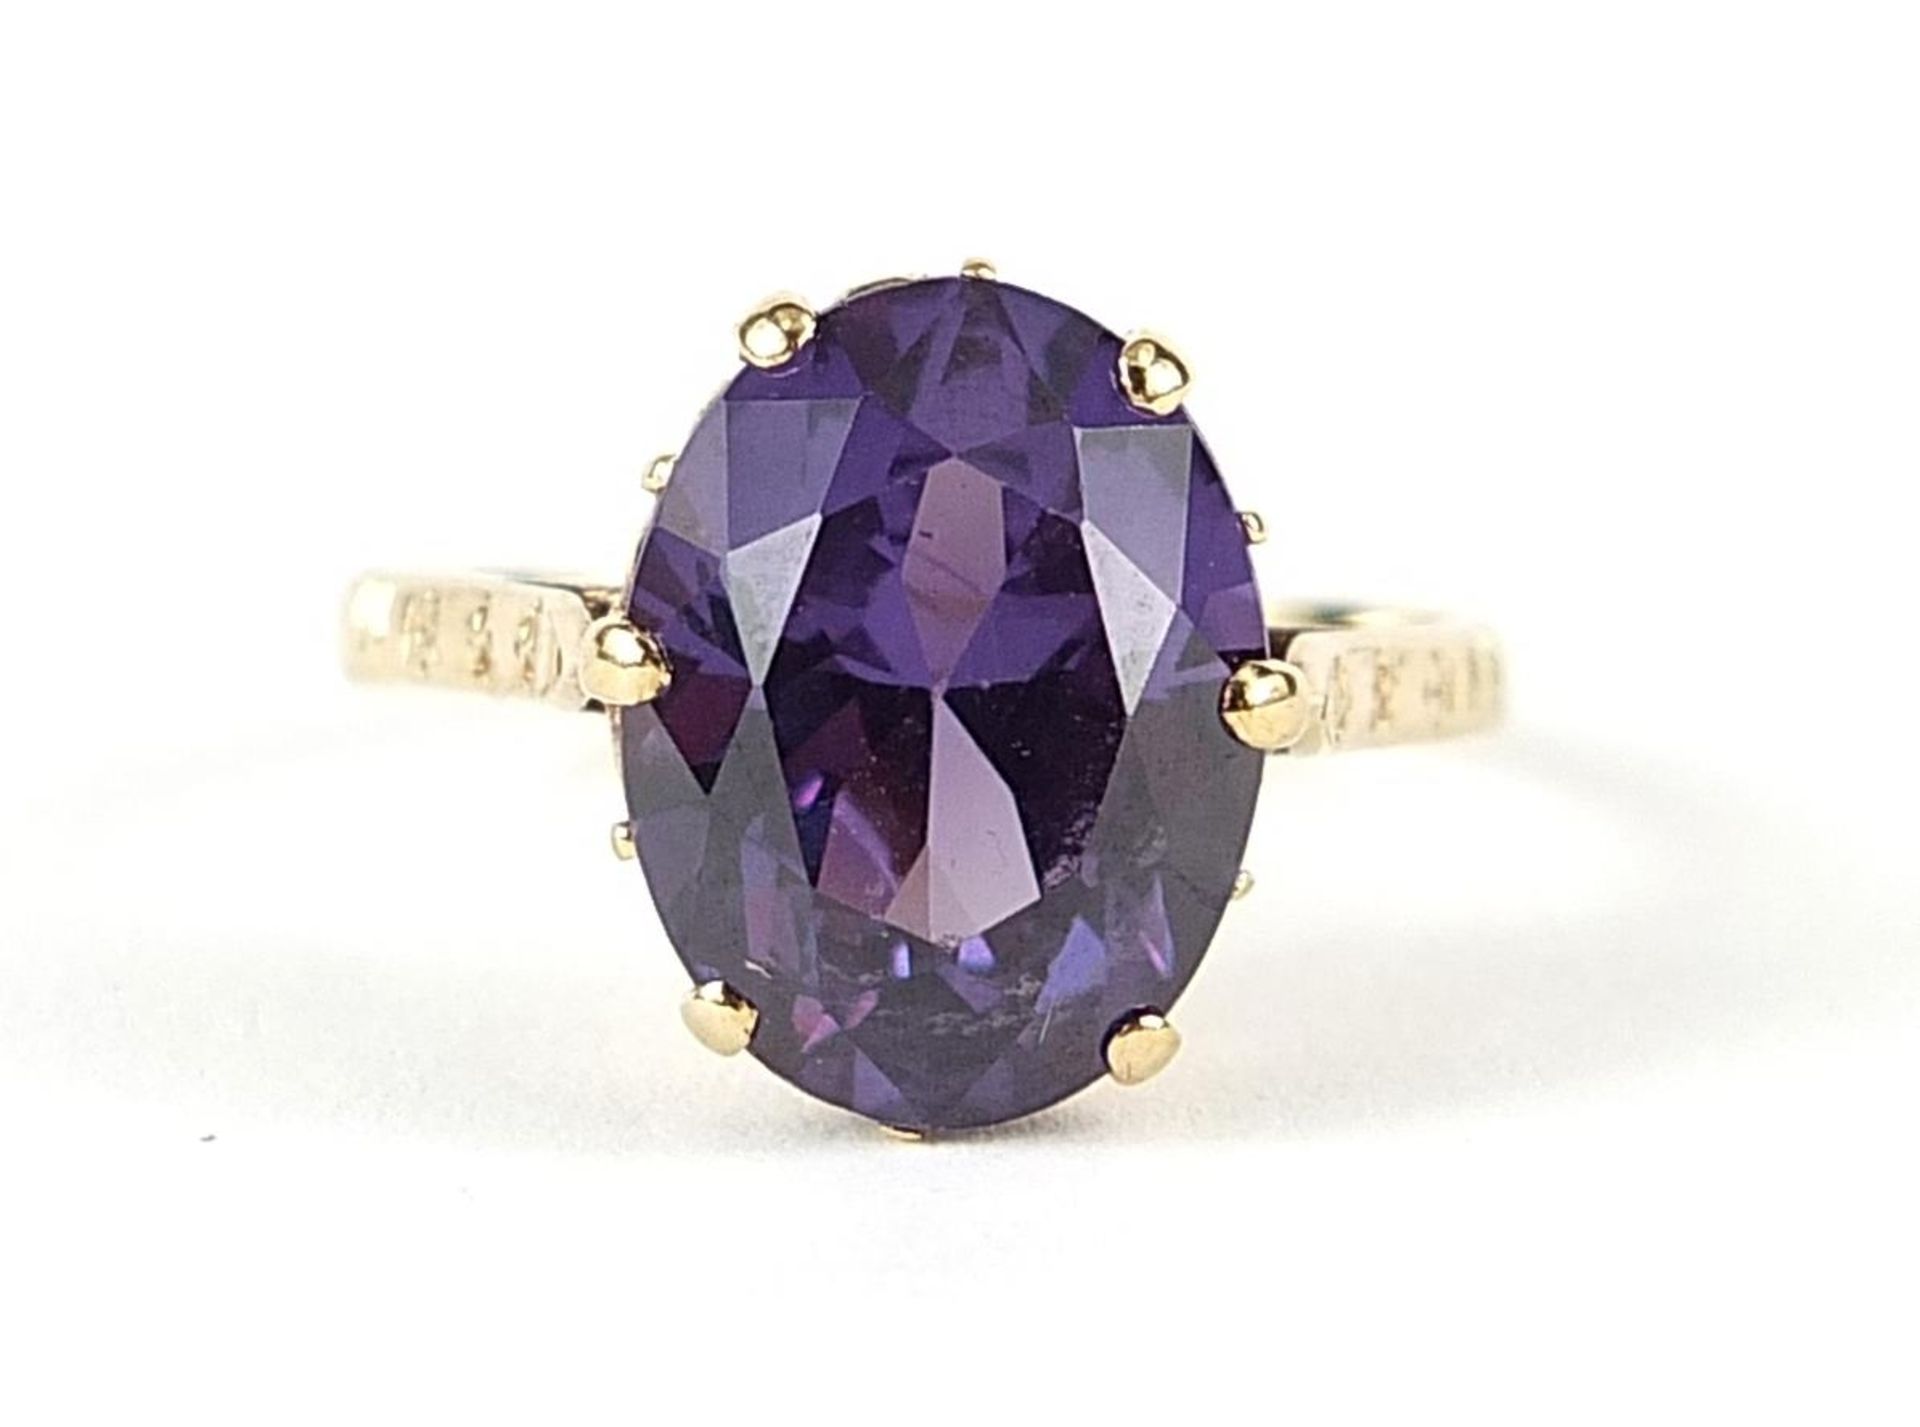 Unmarked gold alexandrite solitaire ring housed in a John Morton box, size P, 3.7g